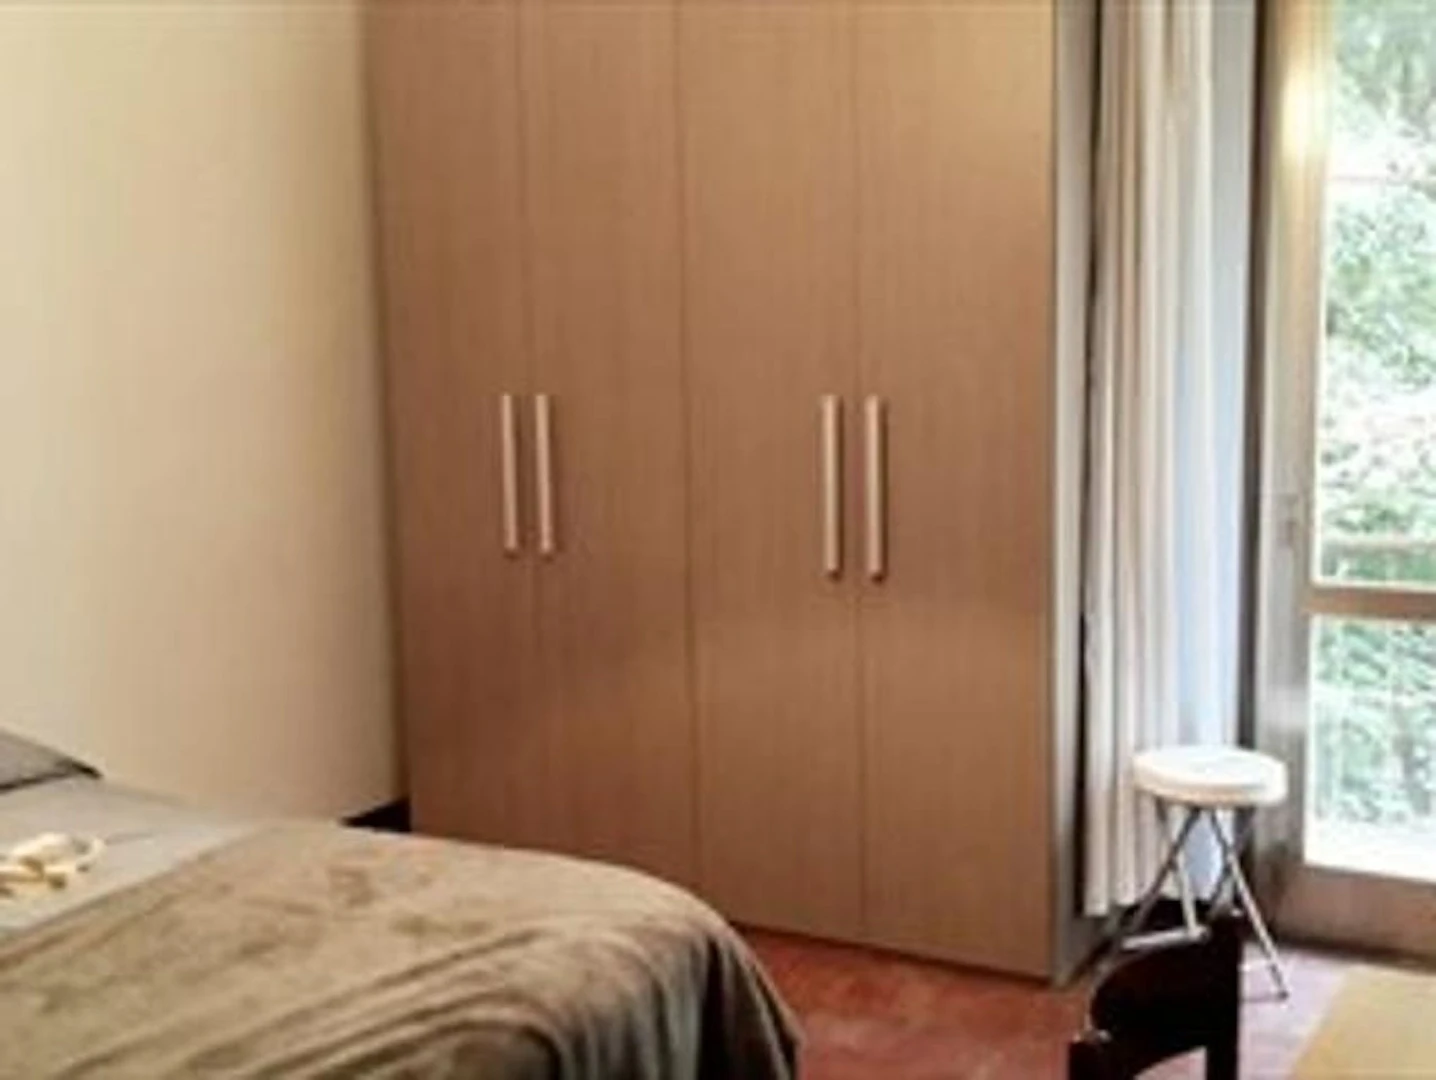 Room for rent in a shared flat in Piacenza